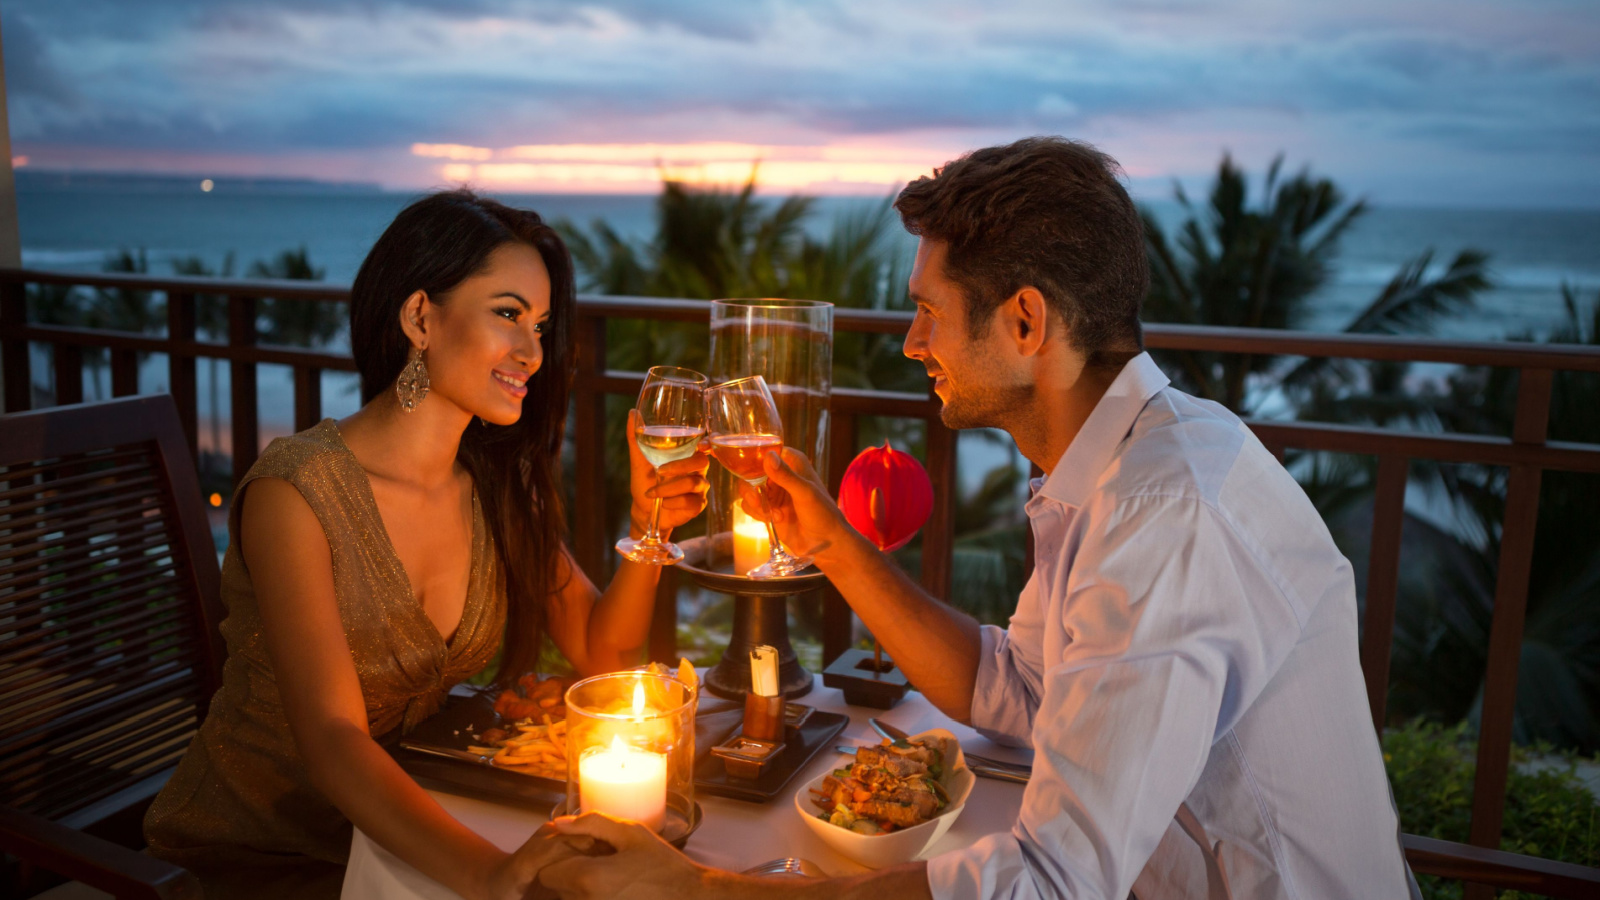 image credit: Lucky-Business/Shutterstock <p><span>Pack a basket with your favorite treats and find a serene spot to watch the sunset. Sharing food in a picturesque setting creates companionship and gratitude. Conversations flow more freely under a sky painted in orange and pink hues, deepening your emotional connection. It’s a reminder of the beauty in simplicity and the joy of just being together.</span></p>